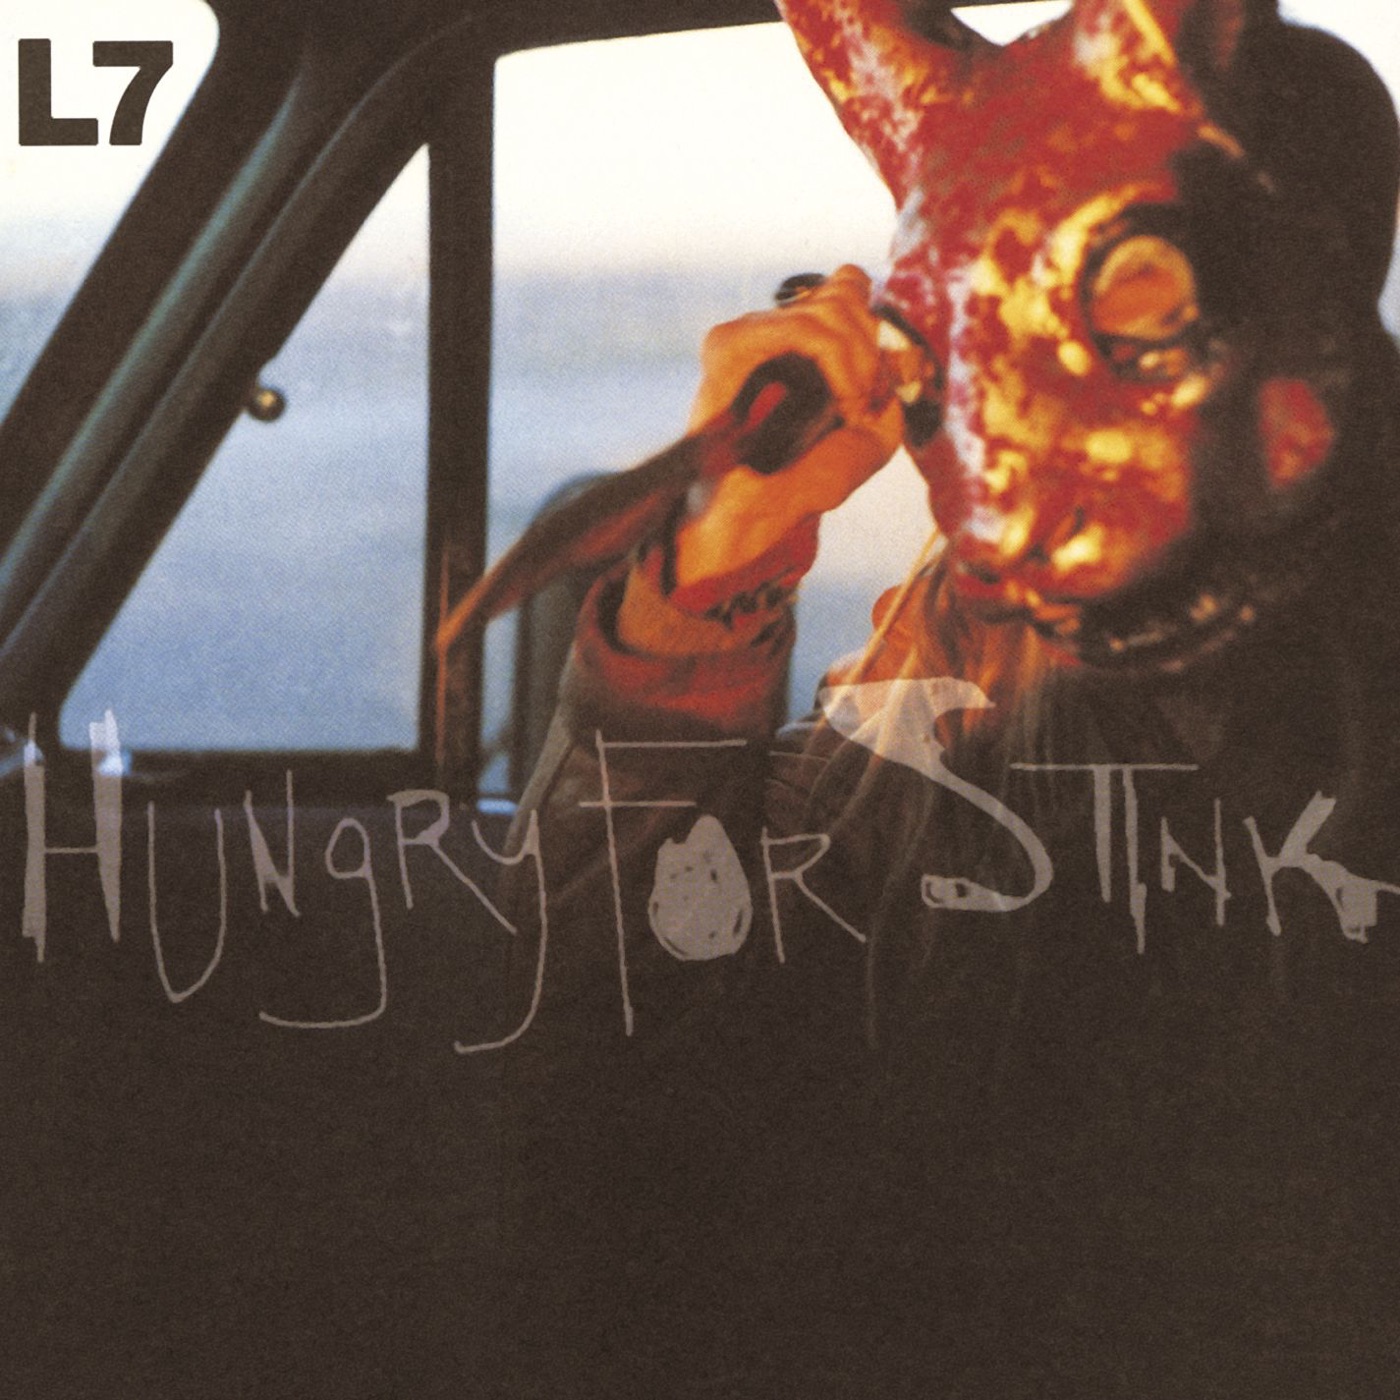 Hungry For Stink by L7